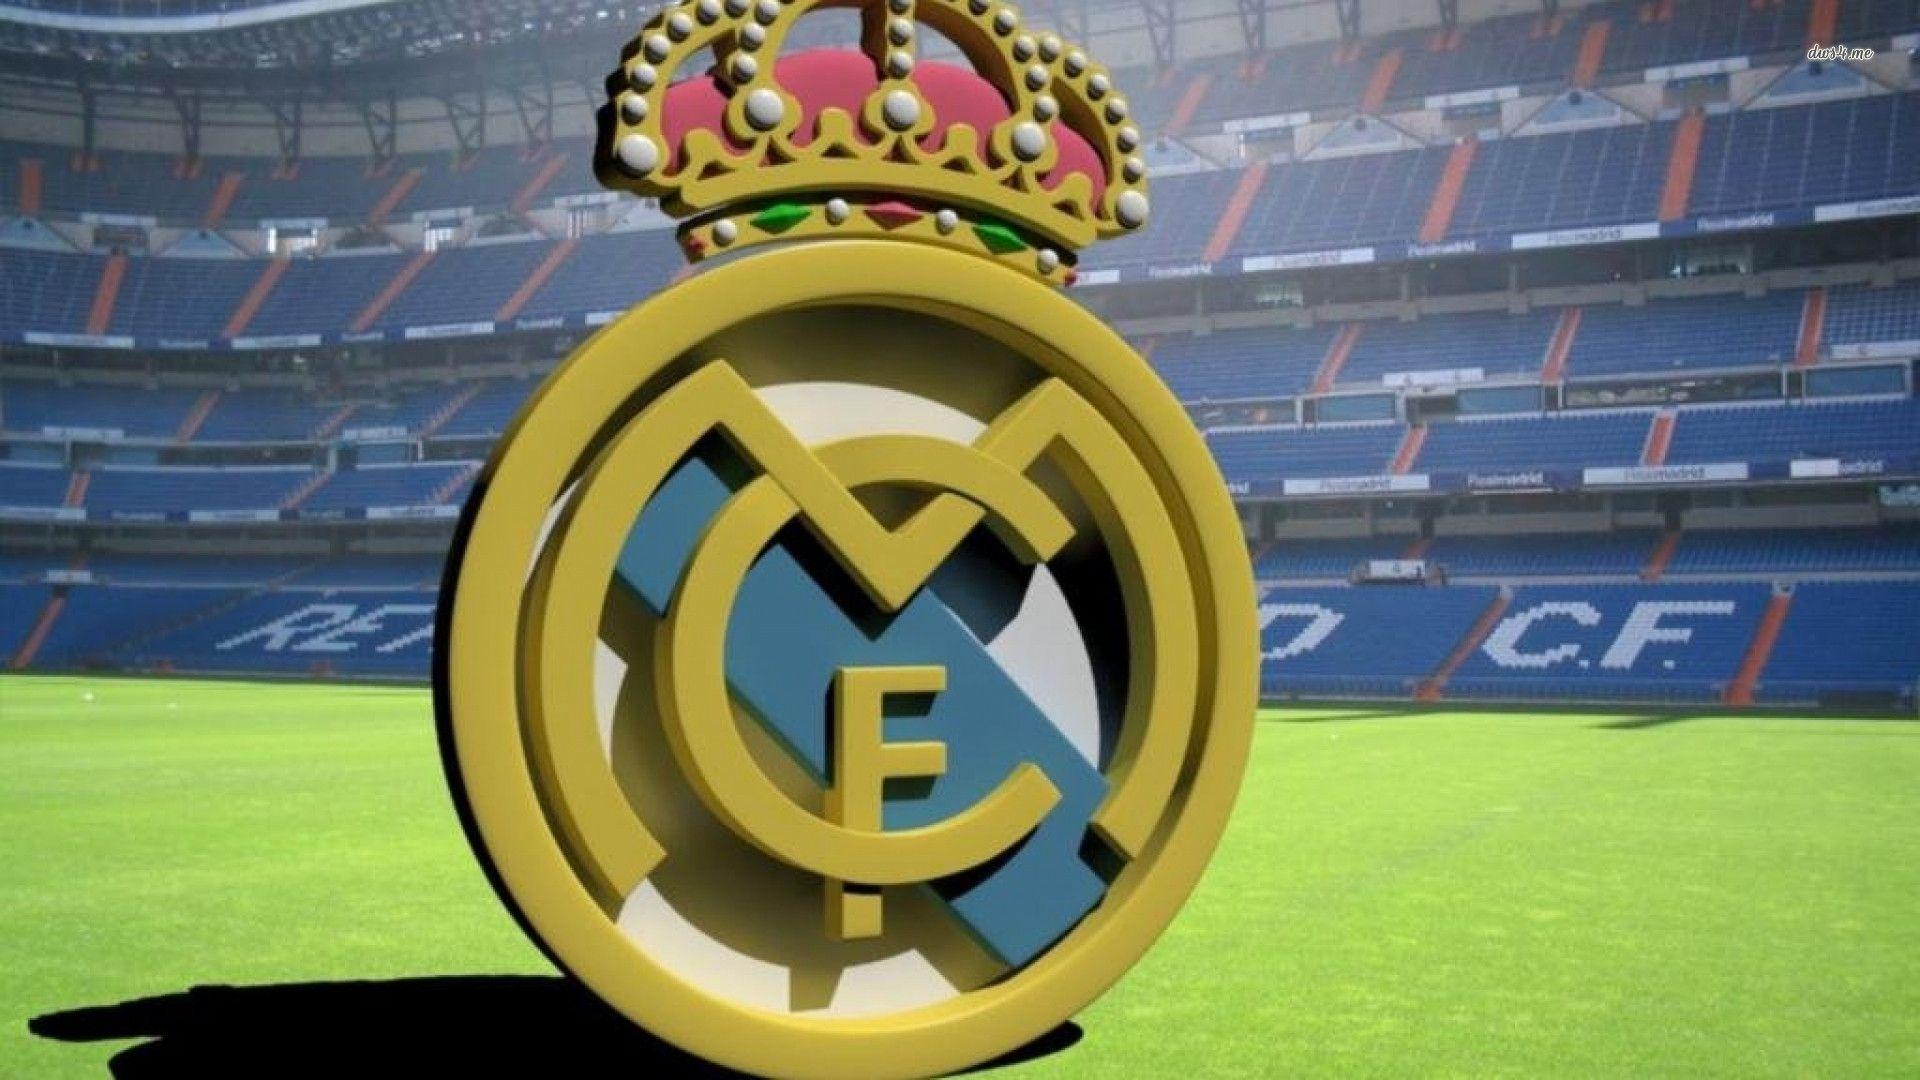 FC Real Madrid Wallpaper Image Photo Picture Background 1920x1080